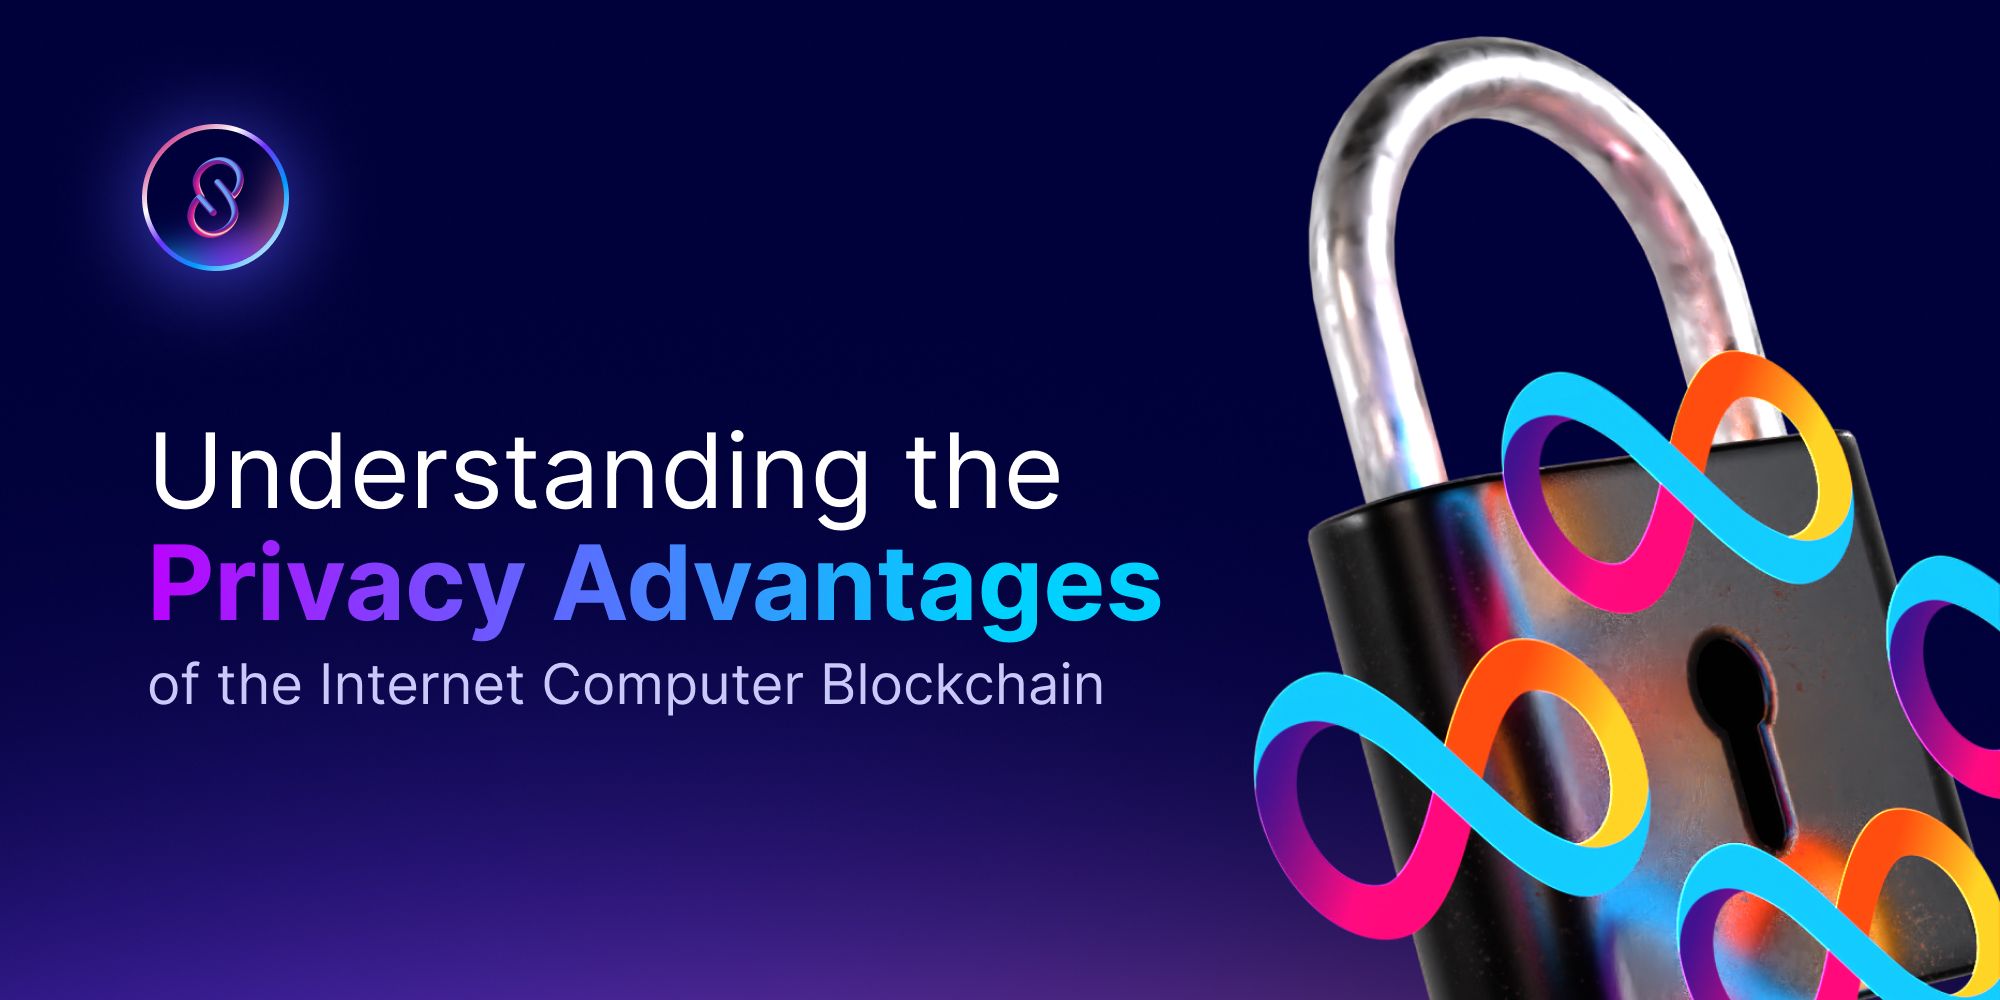 Understanding the Privacy Advantages of the Internet Computer Blockchain